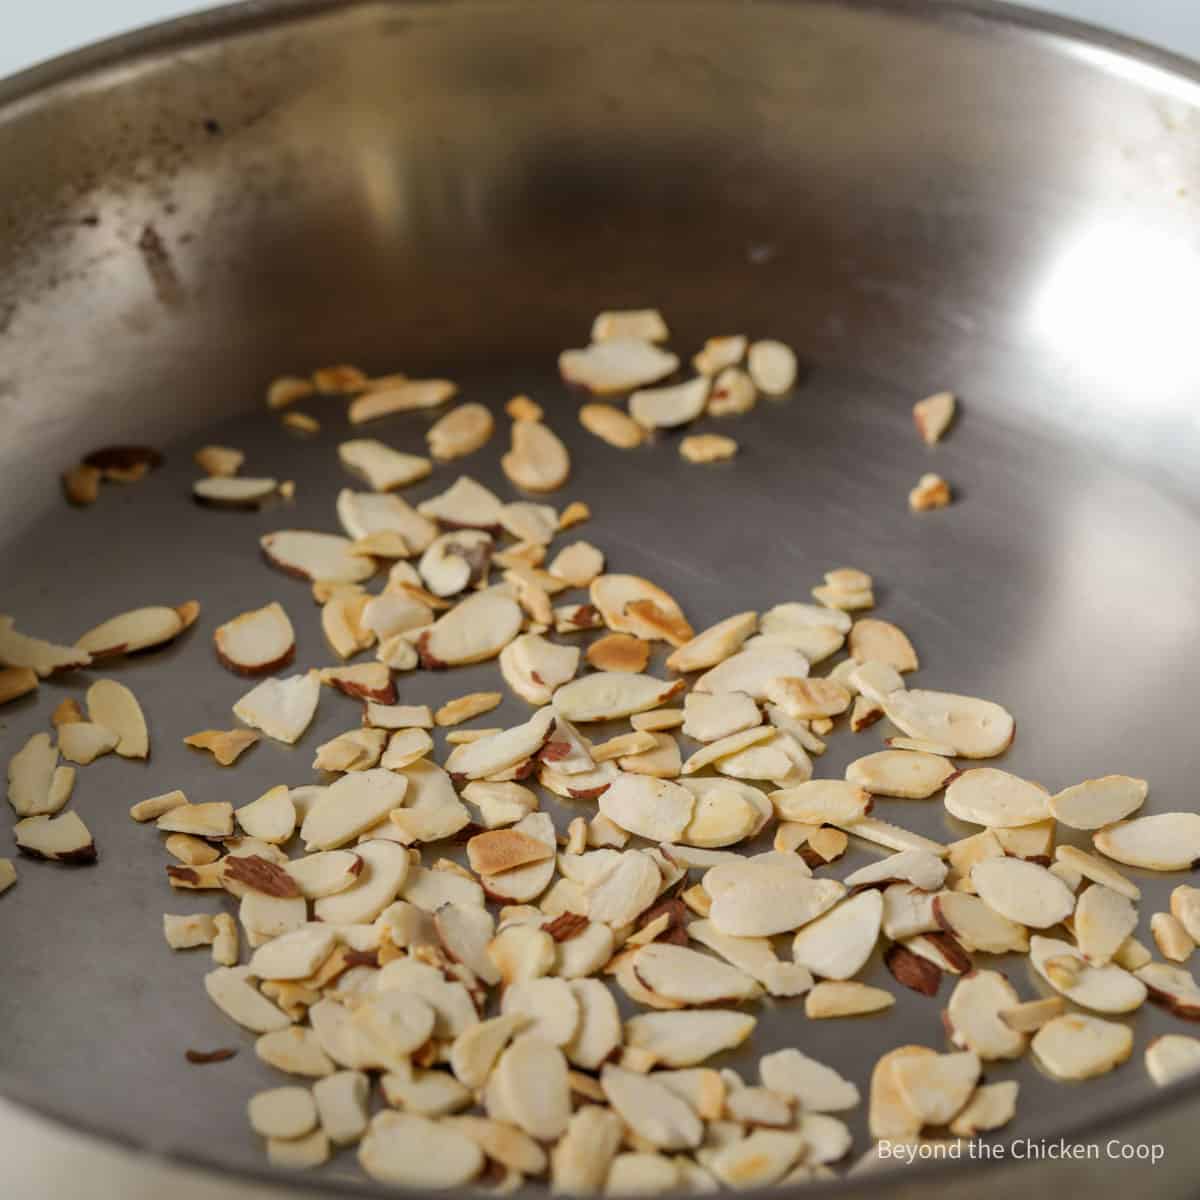 Browning almond slices in a dry pan.